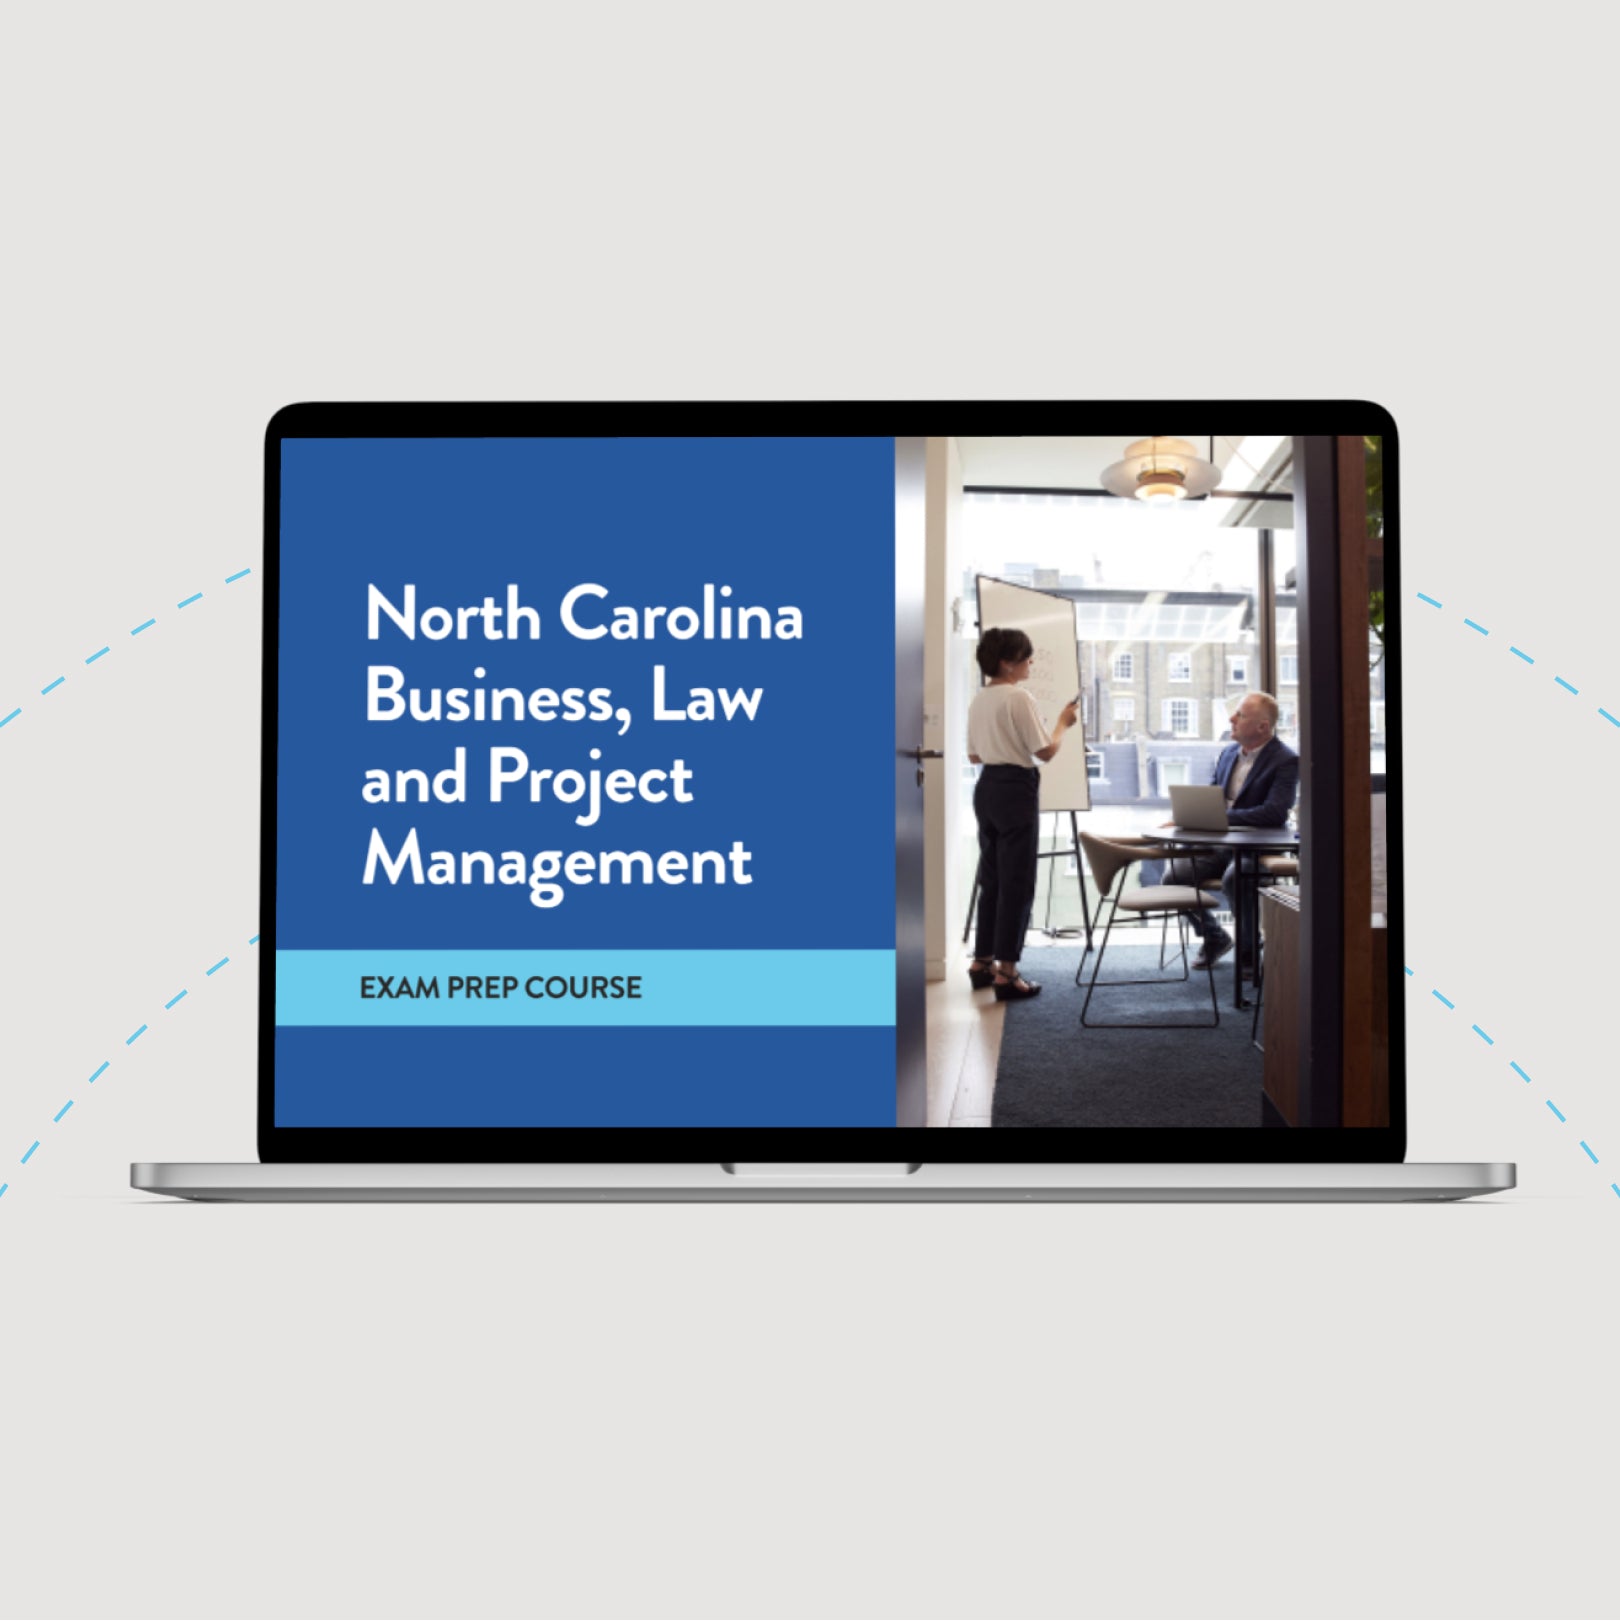 North Carolina Business, Law and Project Management Exam Prep Course